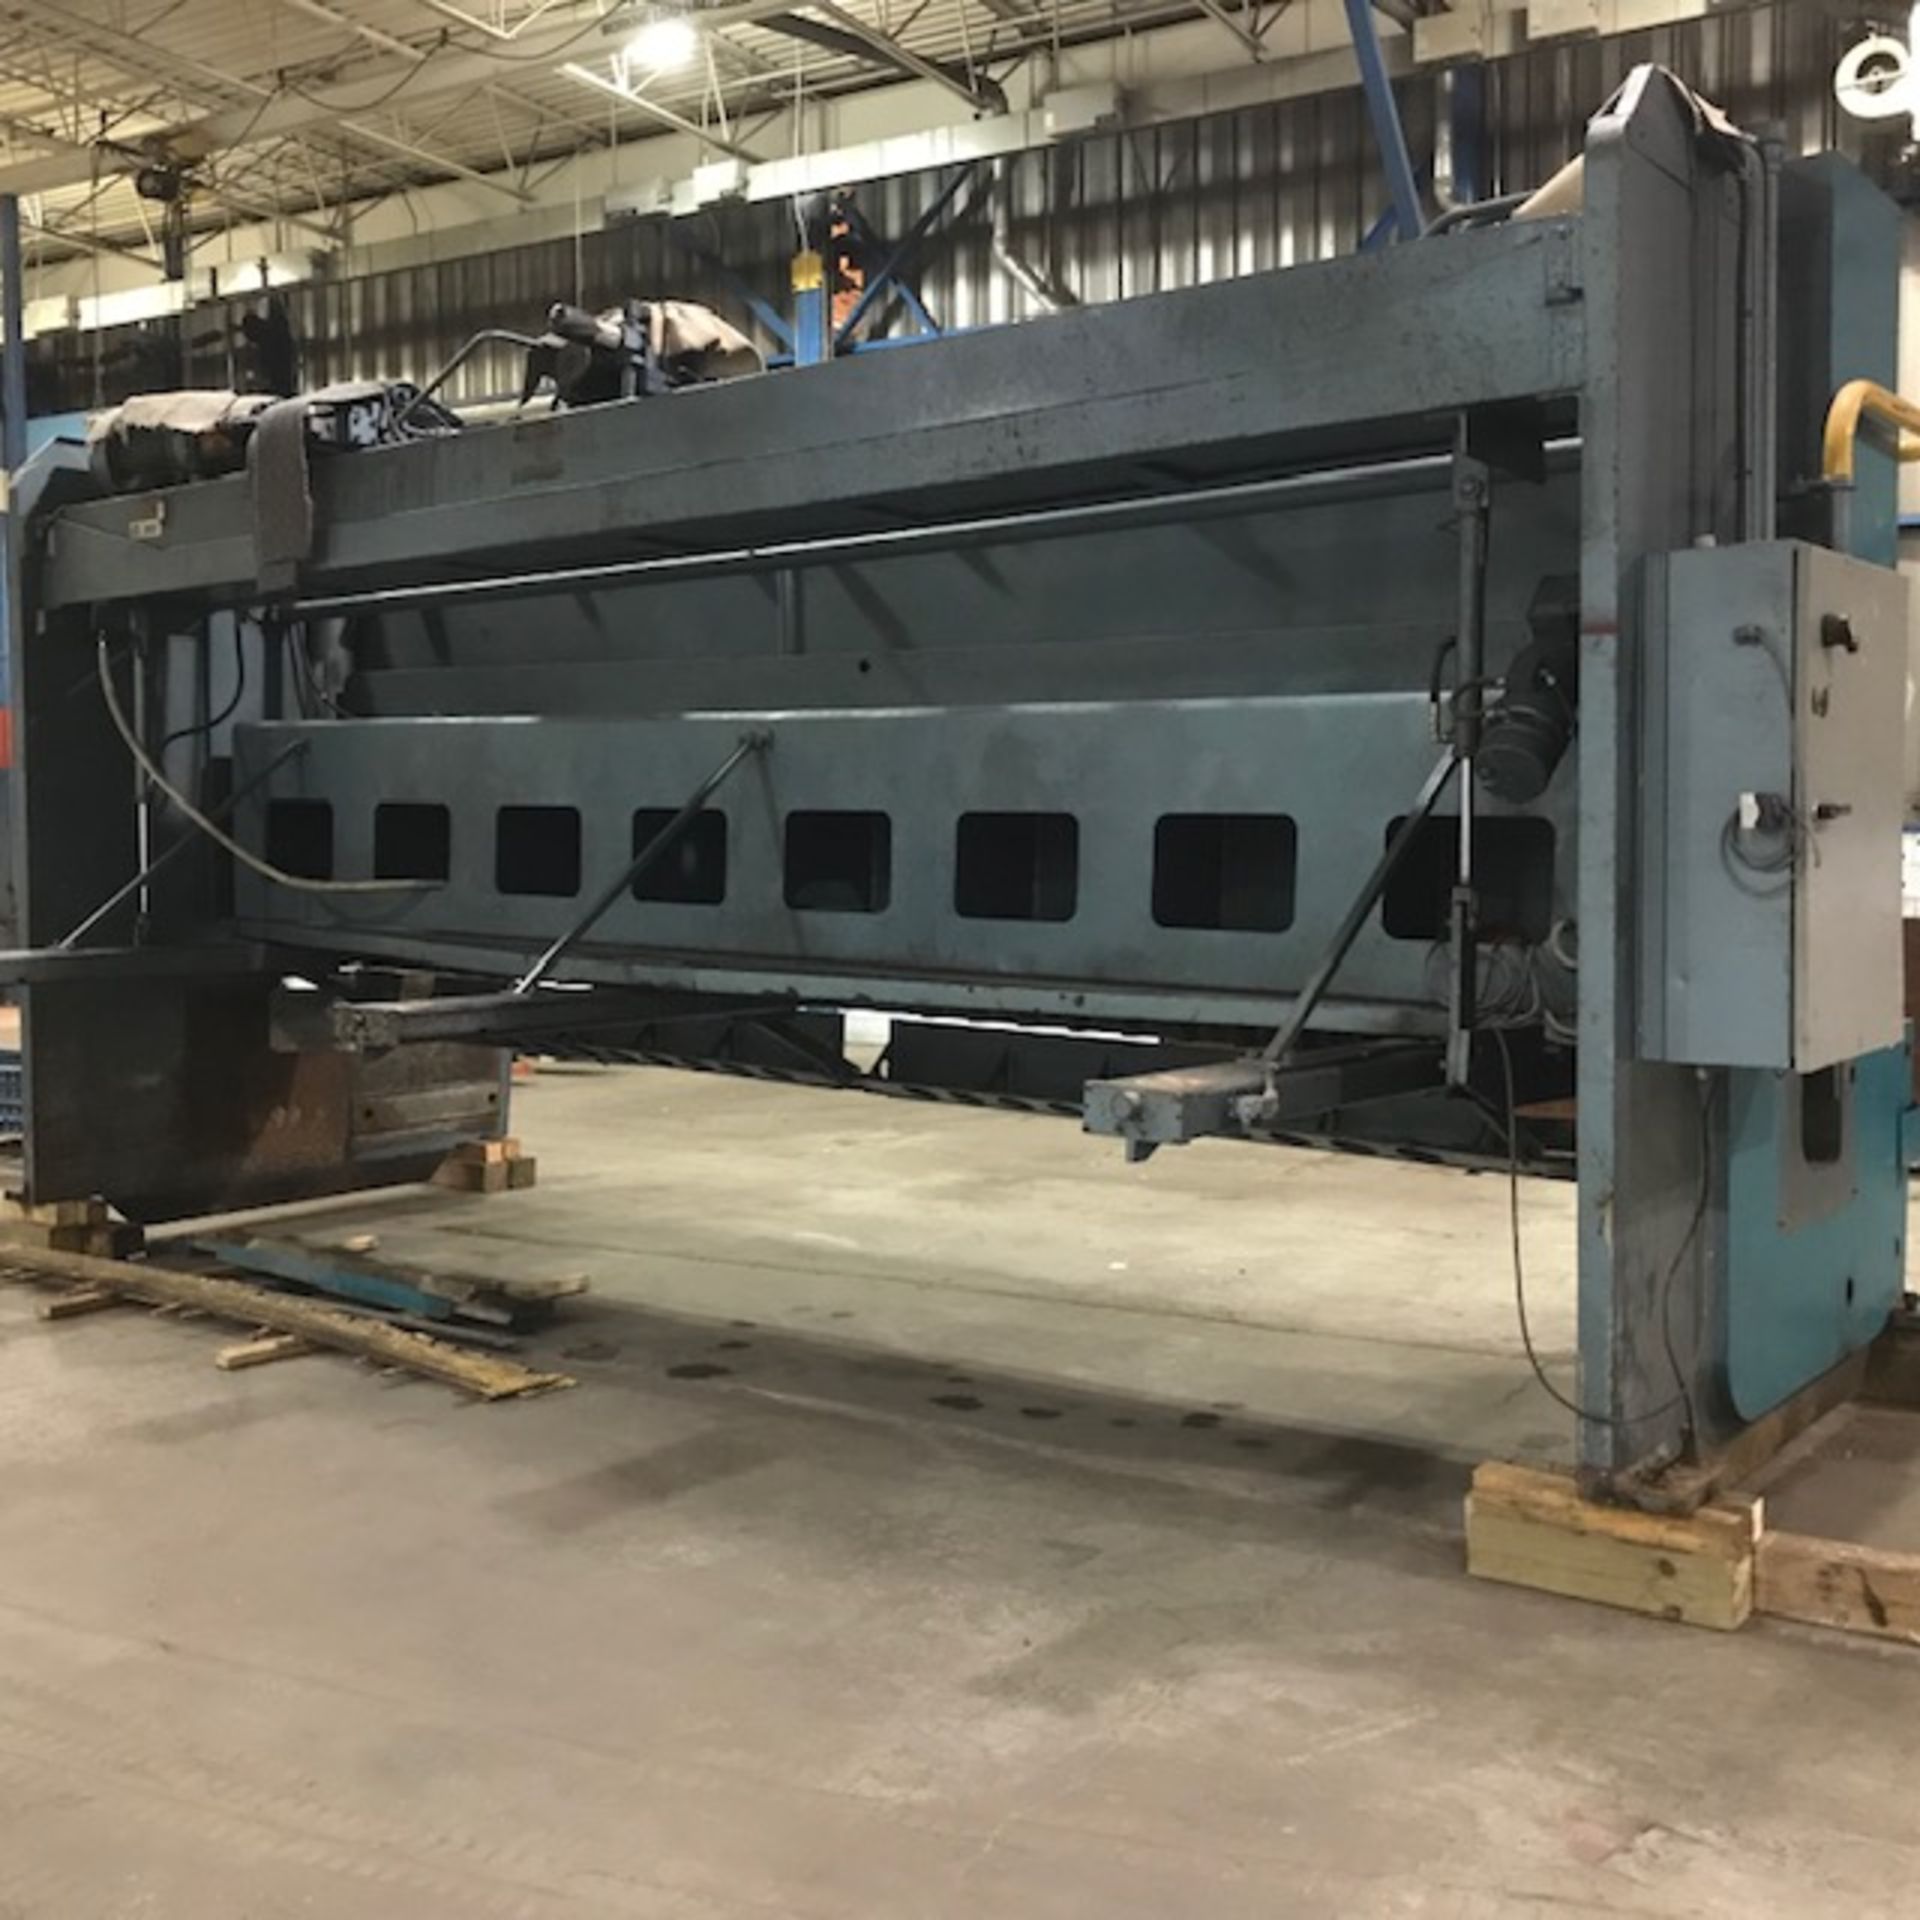 ALLSTEEL CNC HYDRAULIC SHEAR 20FT X 1/2 “ CAPACITY, LOCATION BROCKVILLE, ON - Image 4 of 4